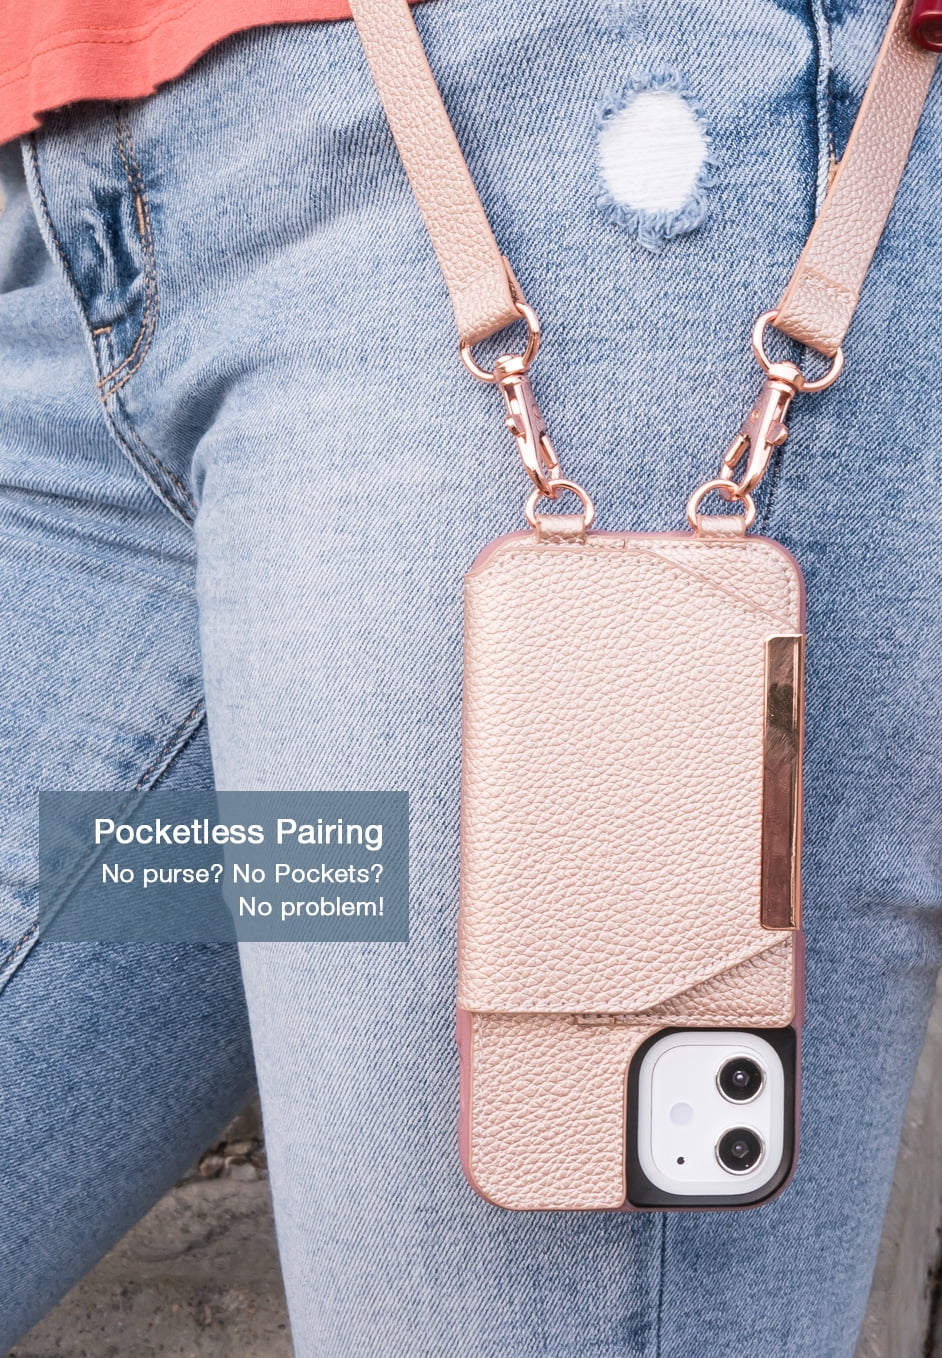 Smartish iPhone 11 Pro Max Crossbody Case - Dancing Queen [Purse / Clutch with Detachable Strap & Card Holder] - Bath Bomb Blue